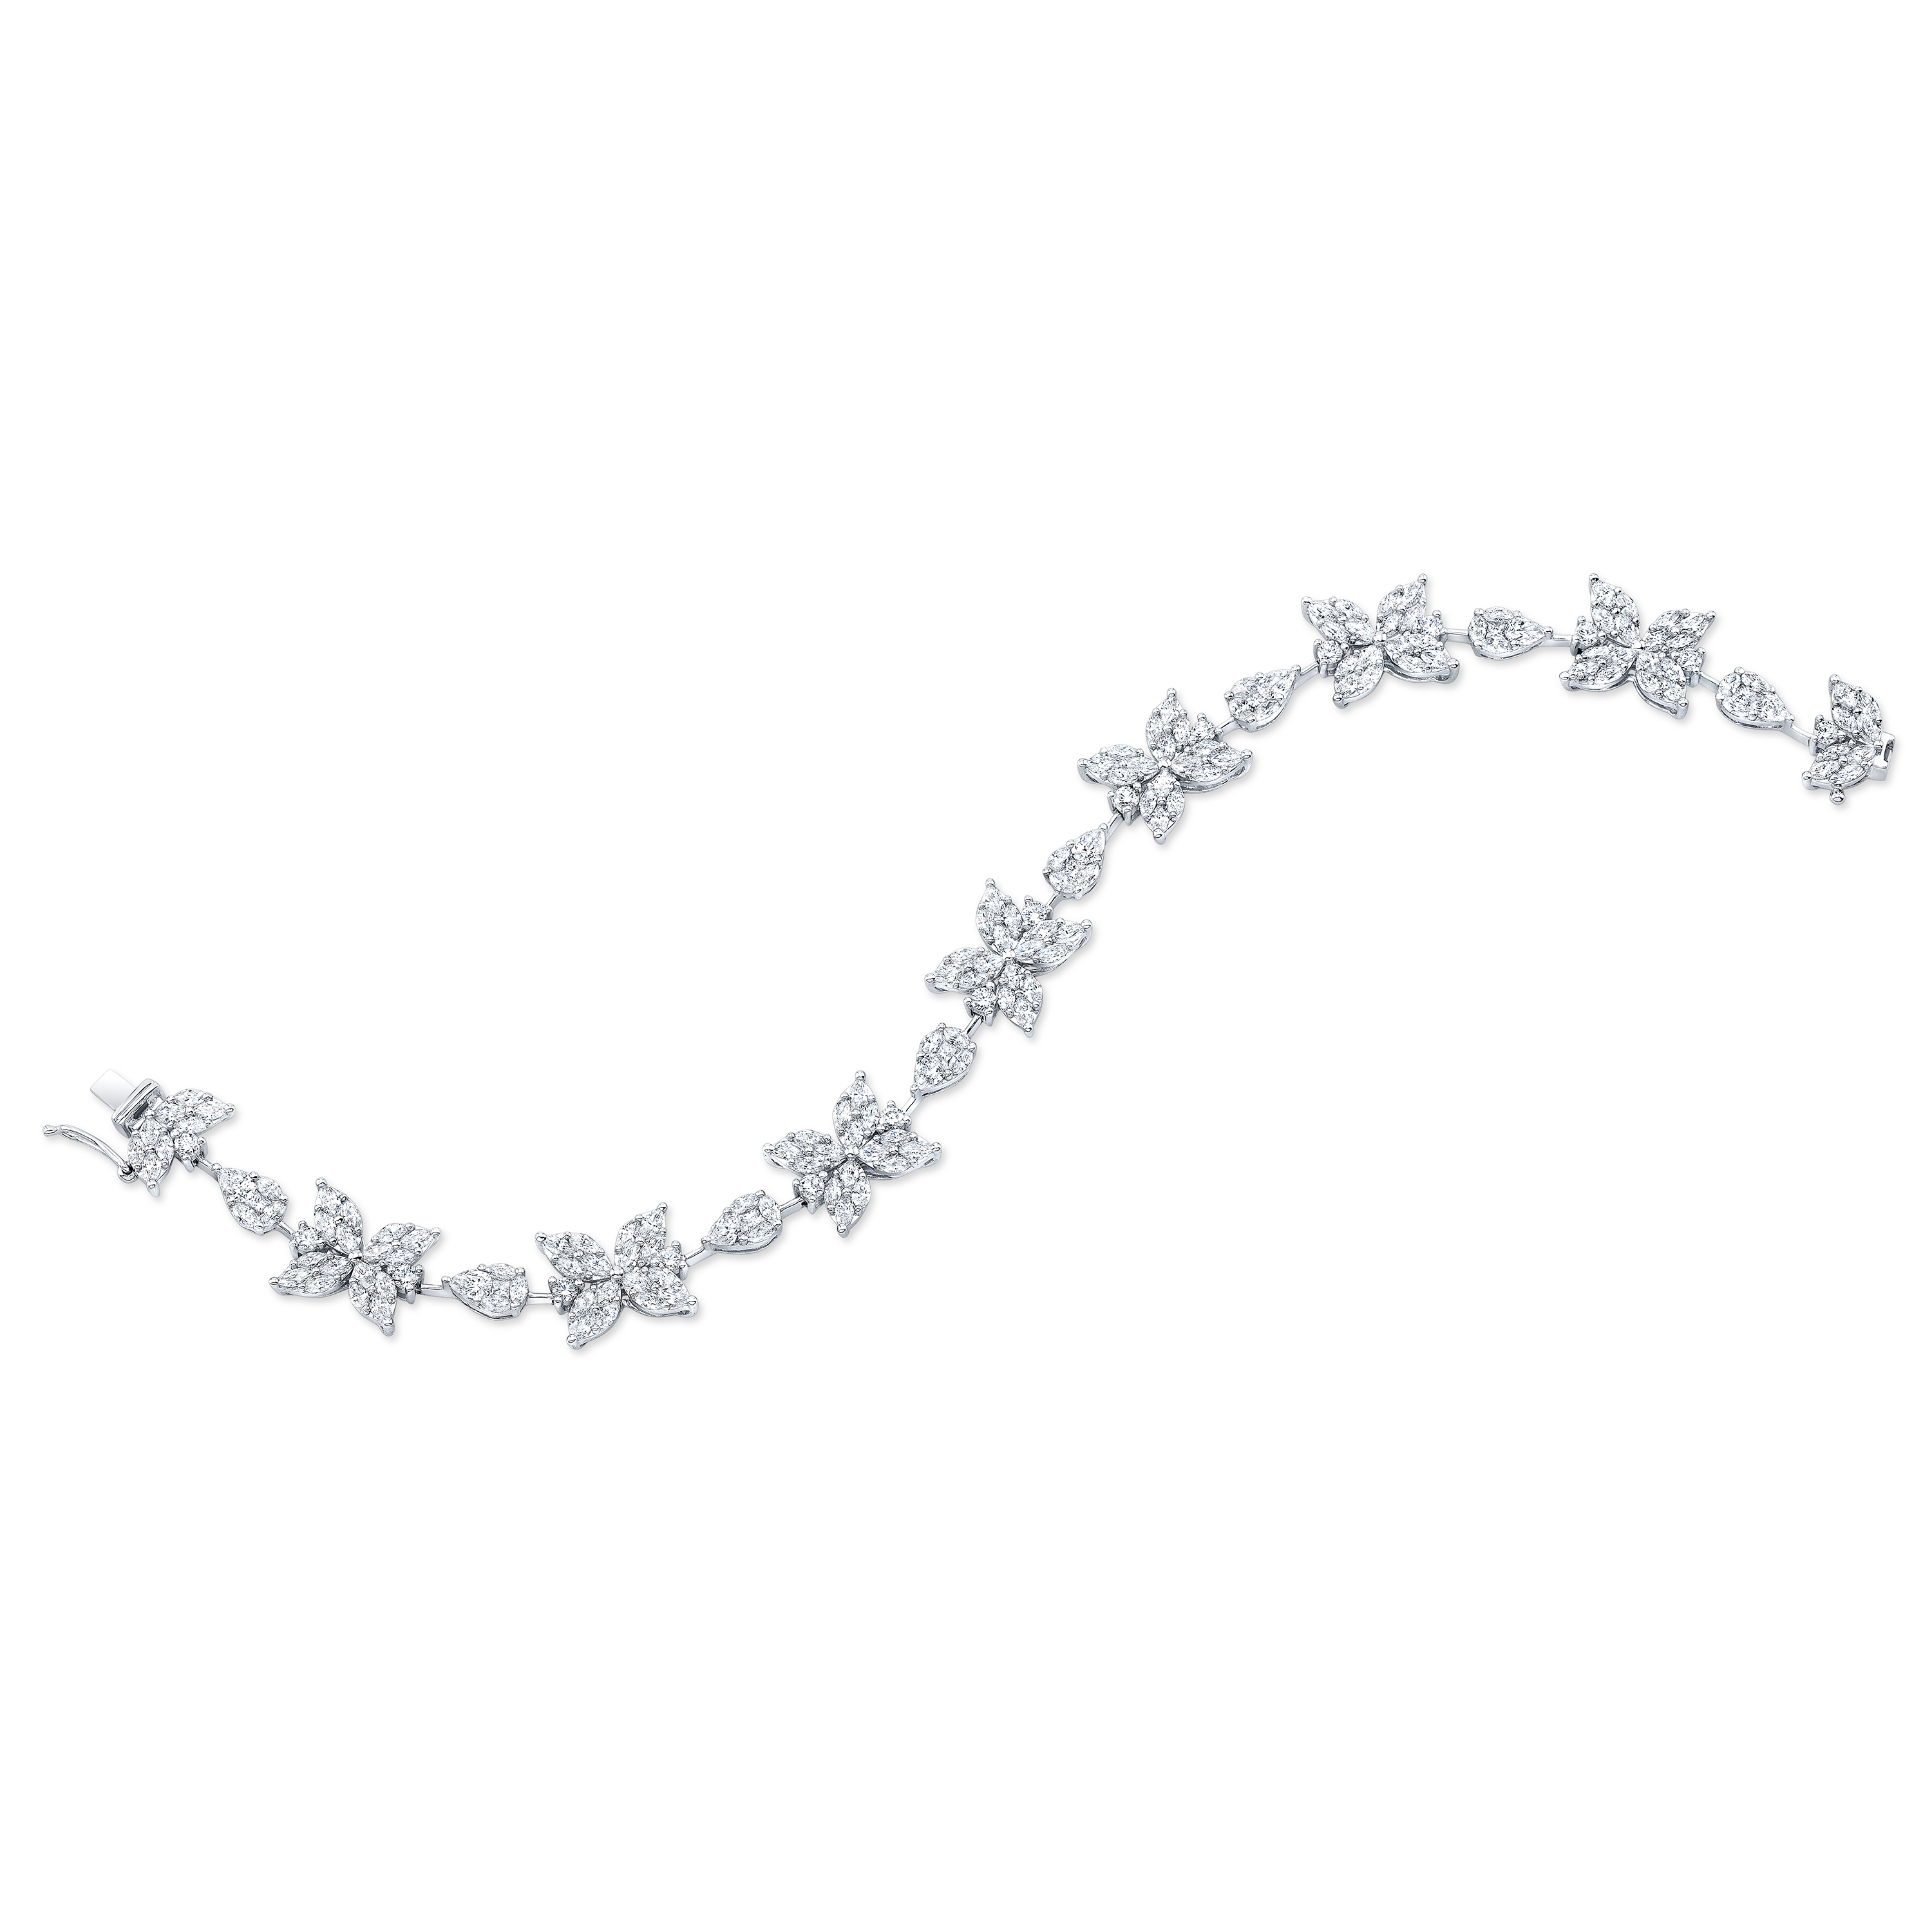 Lorenzo Ungari Woman's Bracelet - Le Scintille in 18K White Gold with  Flowers - 0